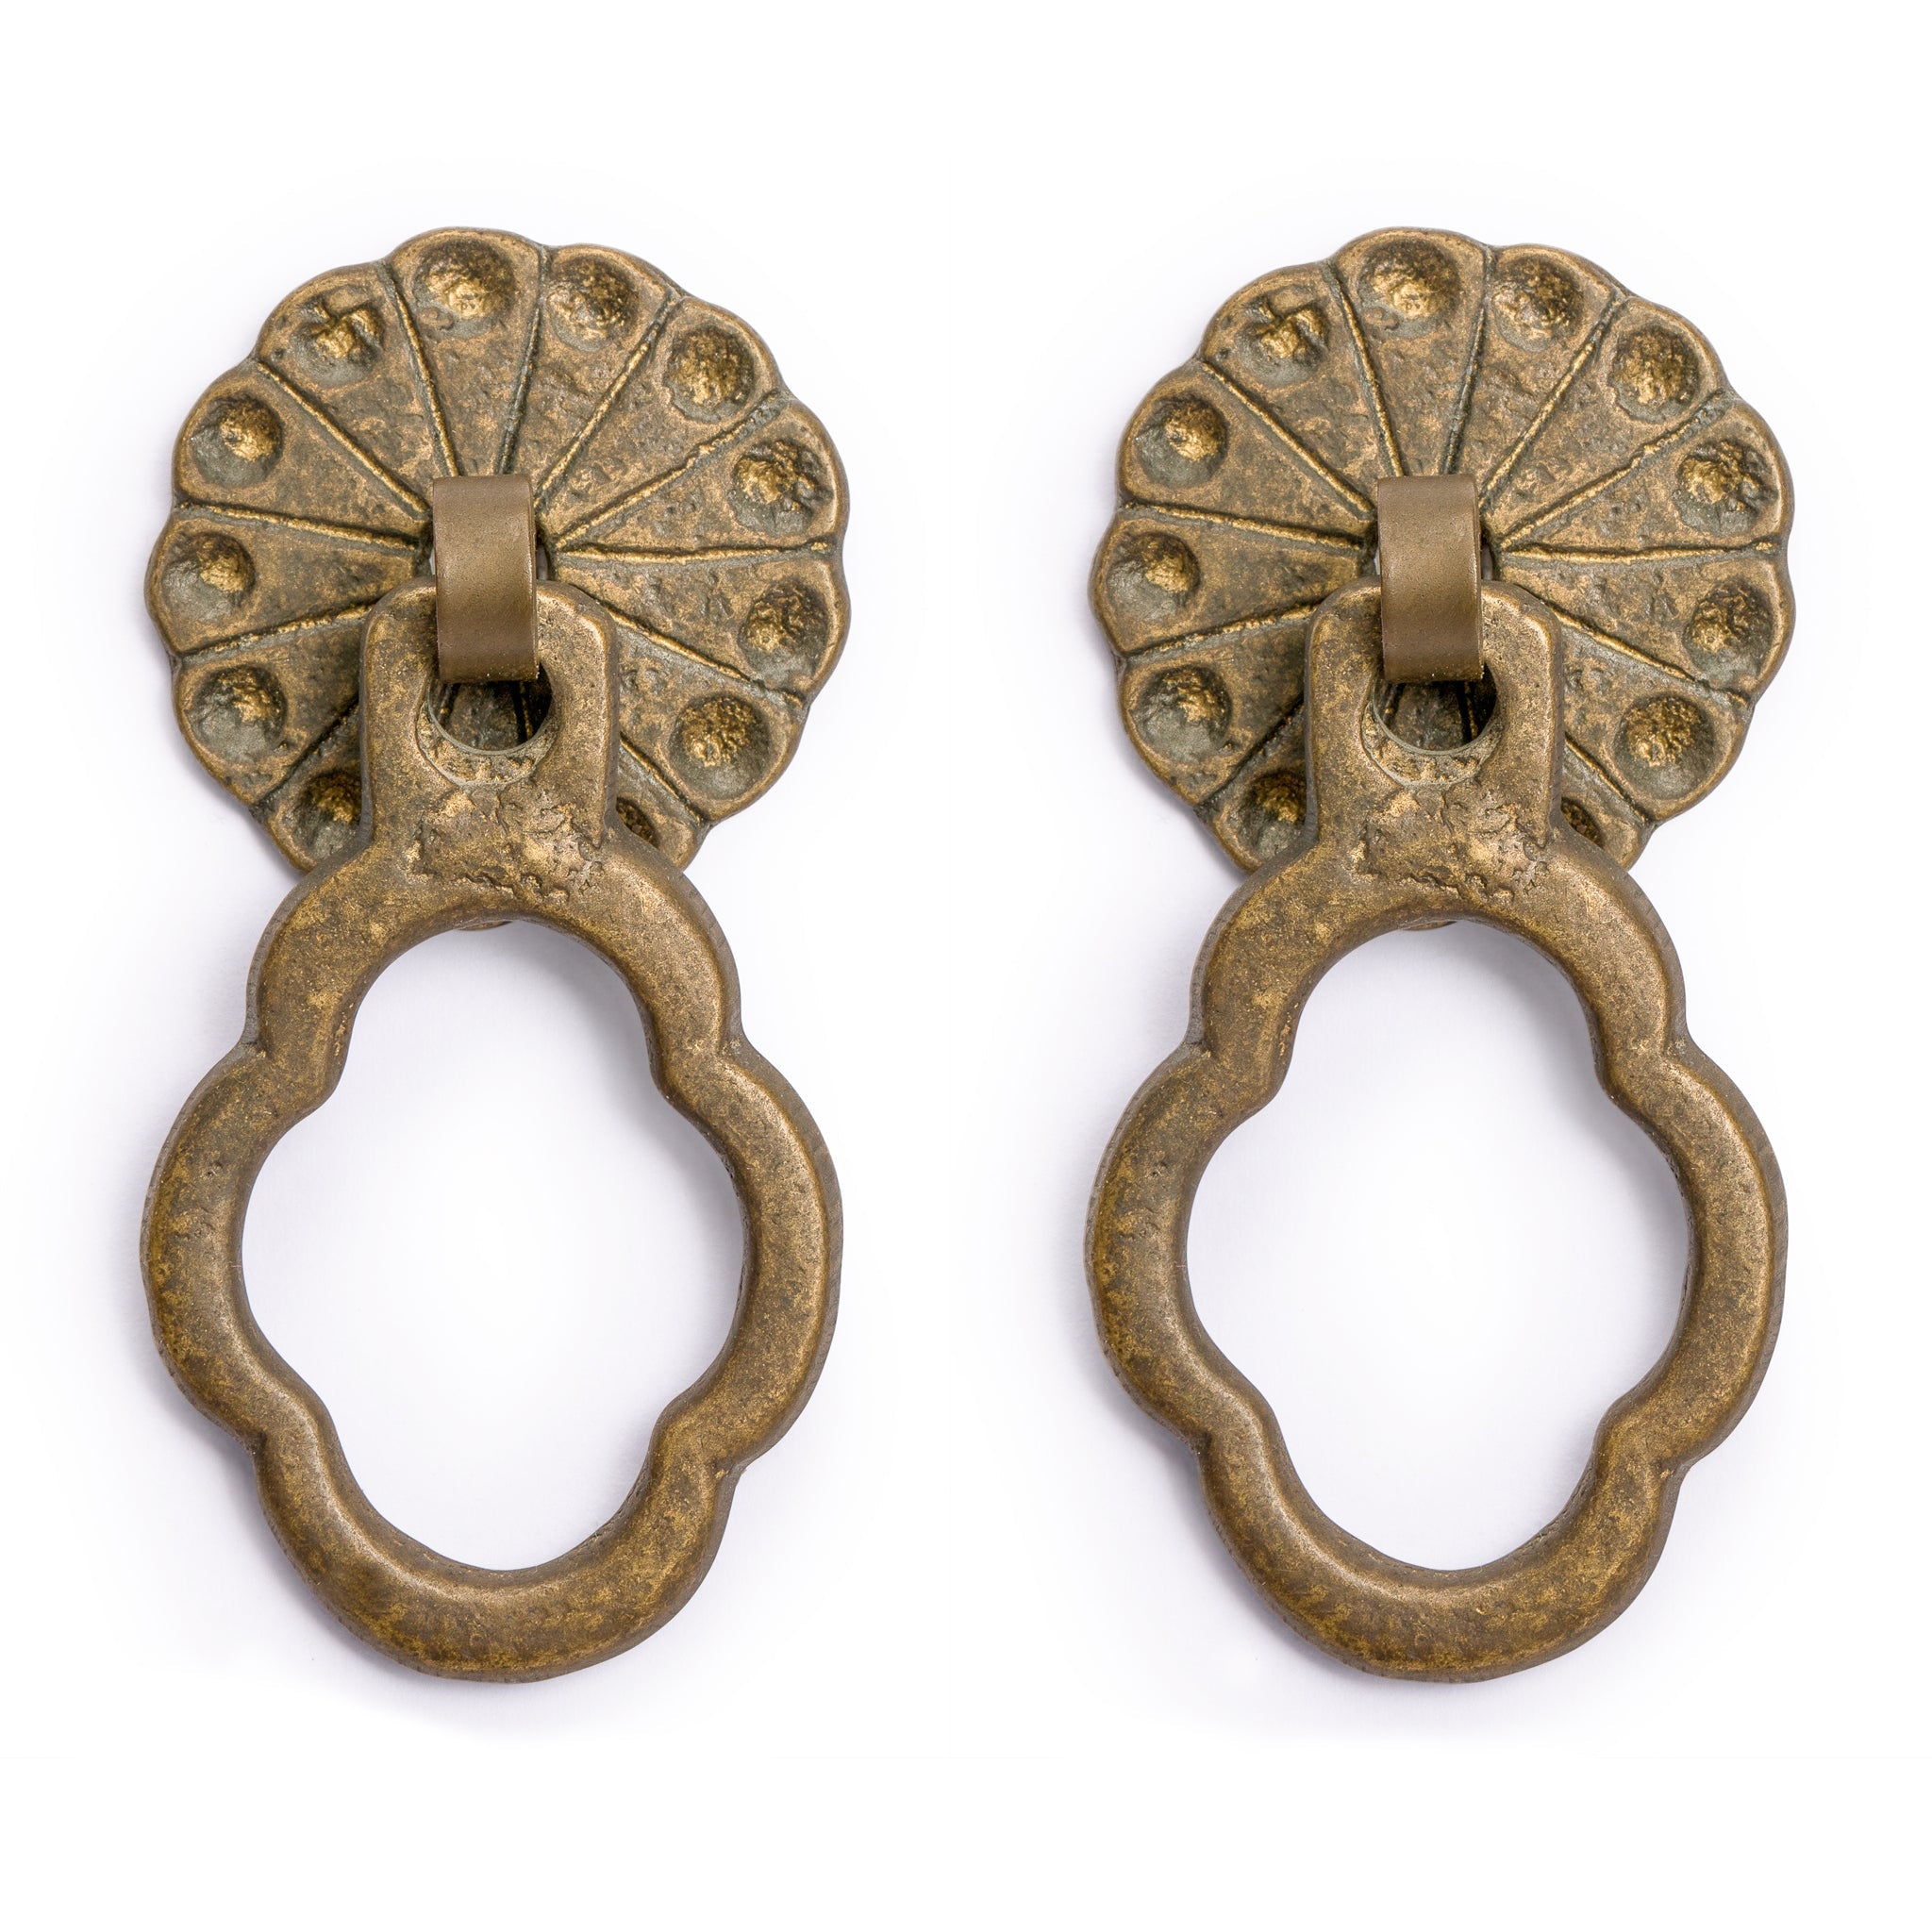 Sparrow Tail Pulls 2.4" - Set of 2-Chinese Brass Hardware